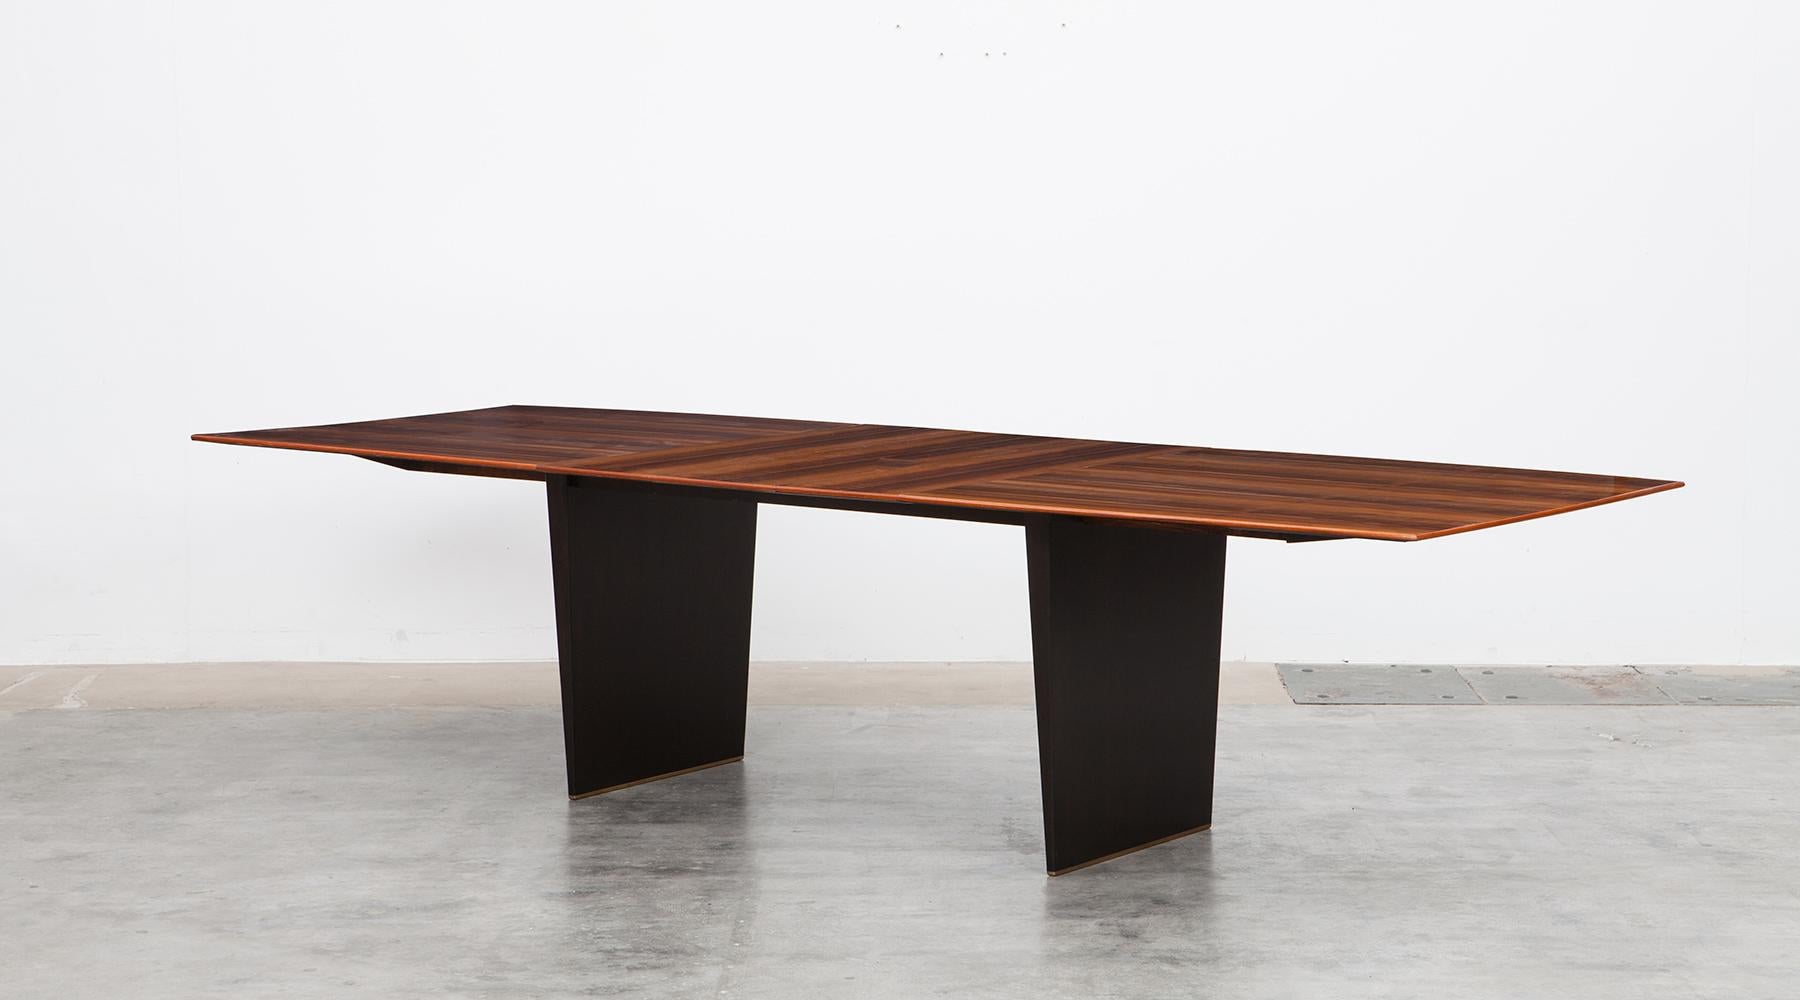 Tawi wooden dining table by Edward Wormley for Dunbar, USA, 1962.

This stunning dining table is designed by American Edward Wormley and comes with a wooden Tawi top which is composed in three leaves, so the table is extendable from 213 to 303 cm.